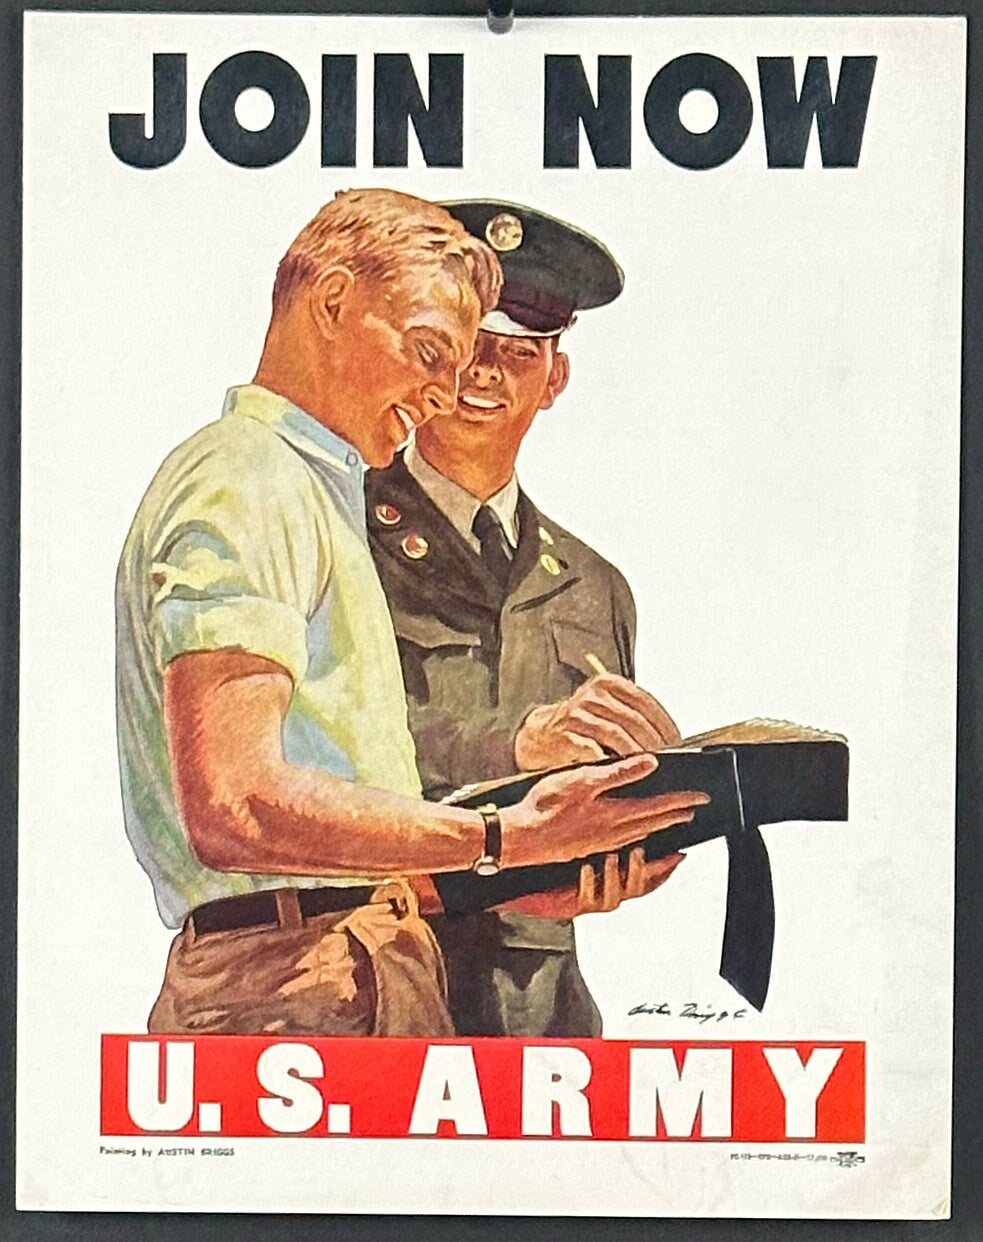 "Join Now" Korean War U.S. Army Recruitment Poster by Austin Briggs (1951) - posterpalace.com